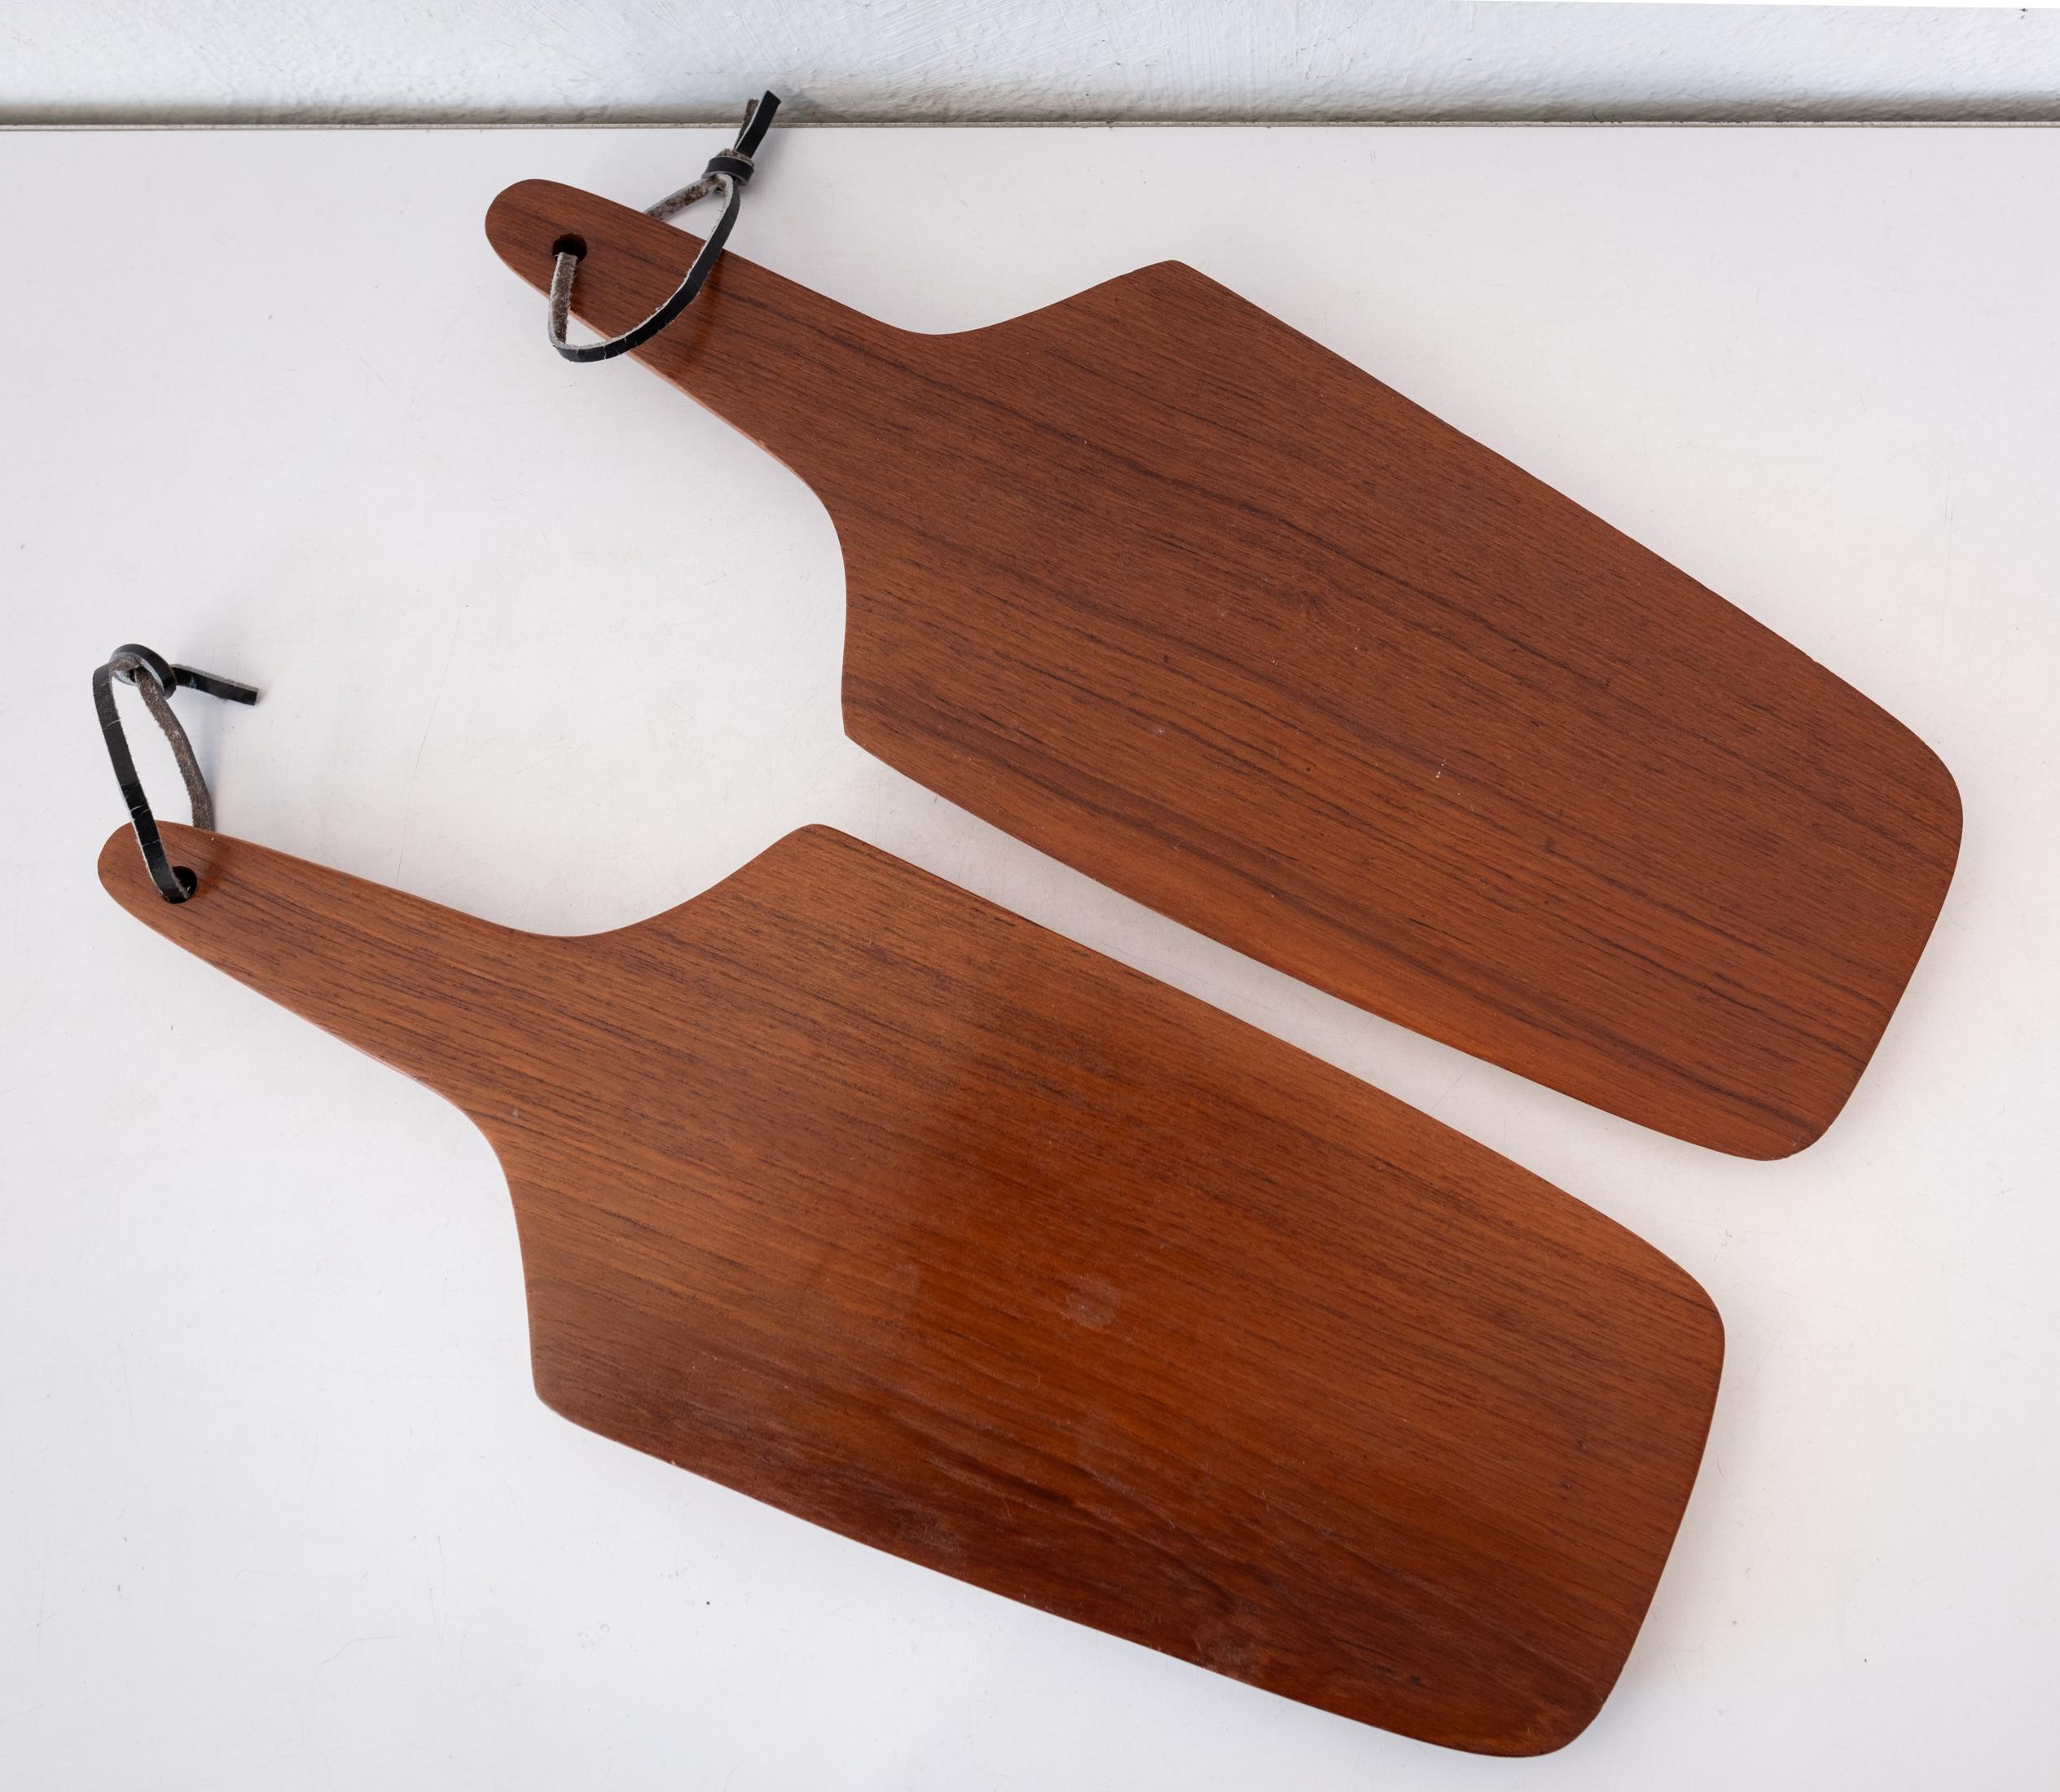 Pair of cutting or charcuterie boards in teak. They both have the original straps for hanging. They appear to be unused. Made in Denmark. 

Each board measures: 15.75x 5.75 x.75 